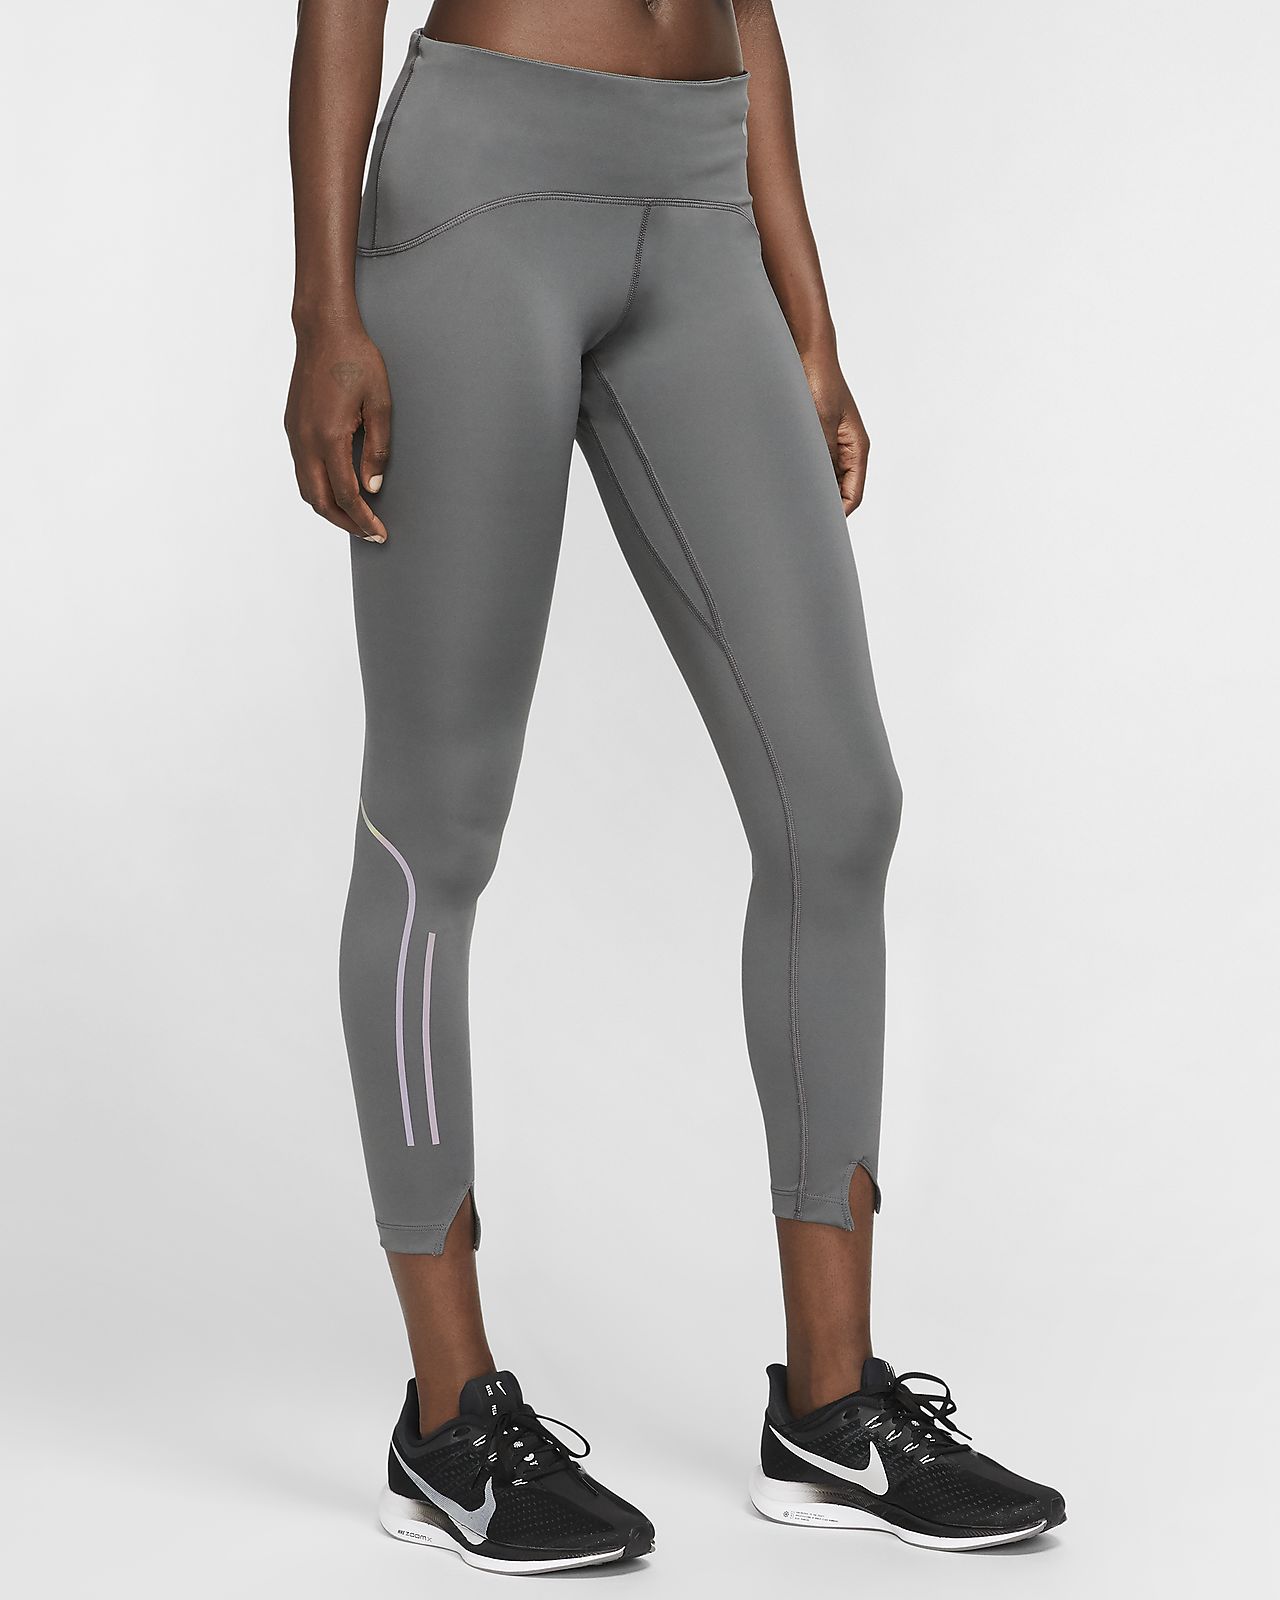 Nike Icon Clash Speed Tights Black / Metallic Gold With 2 types of